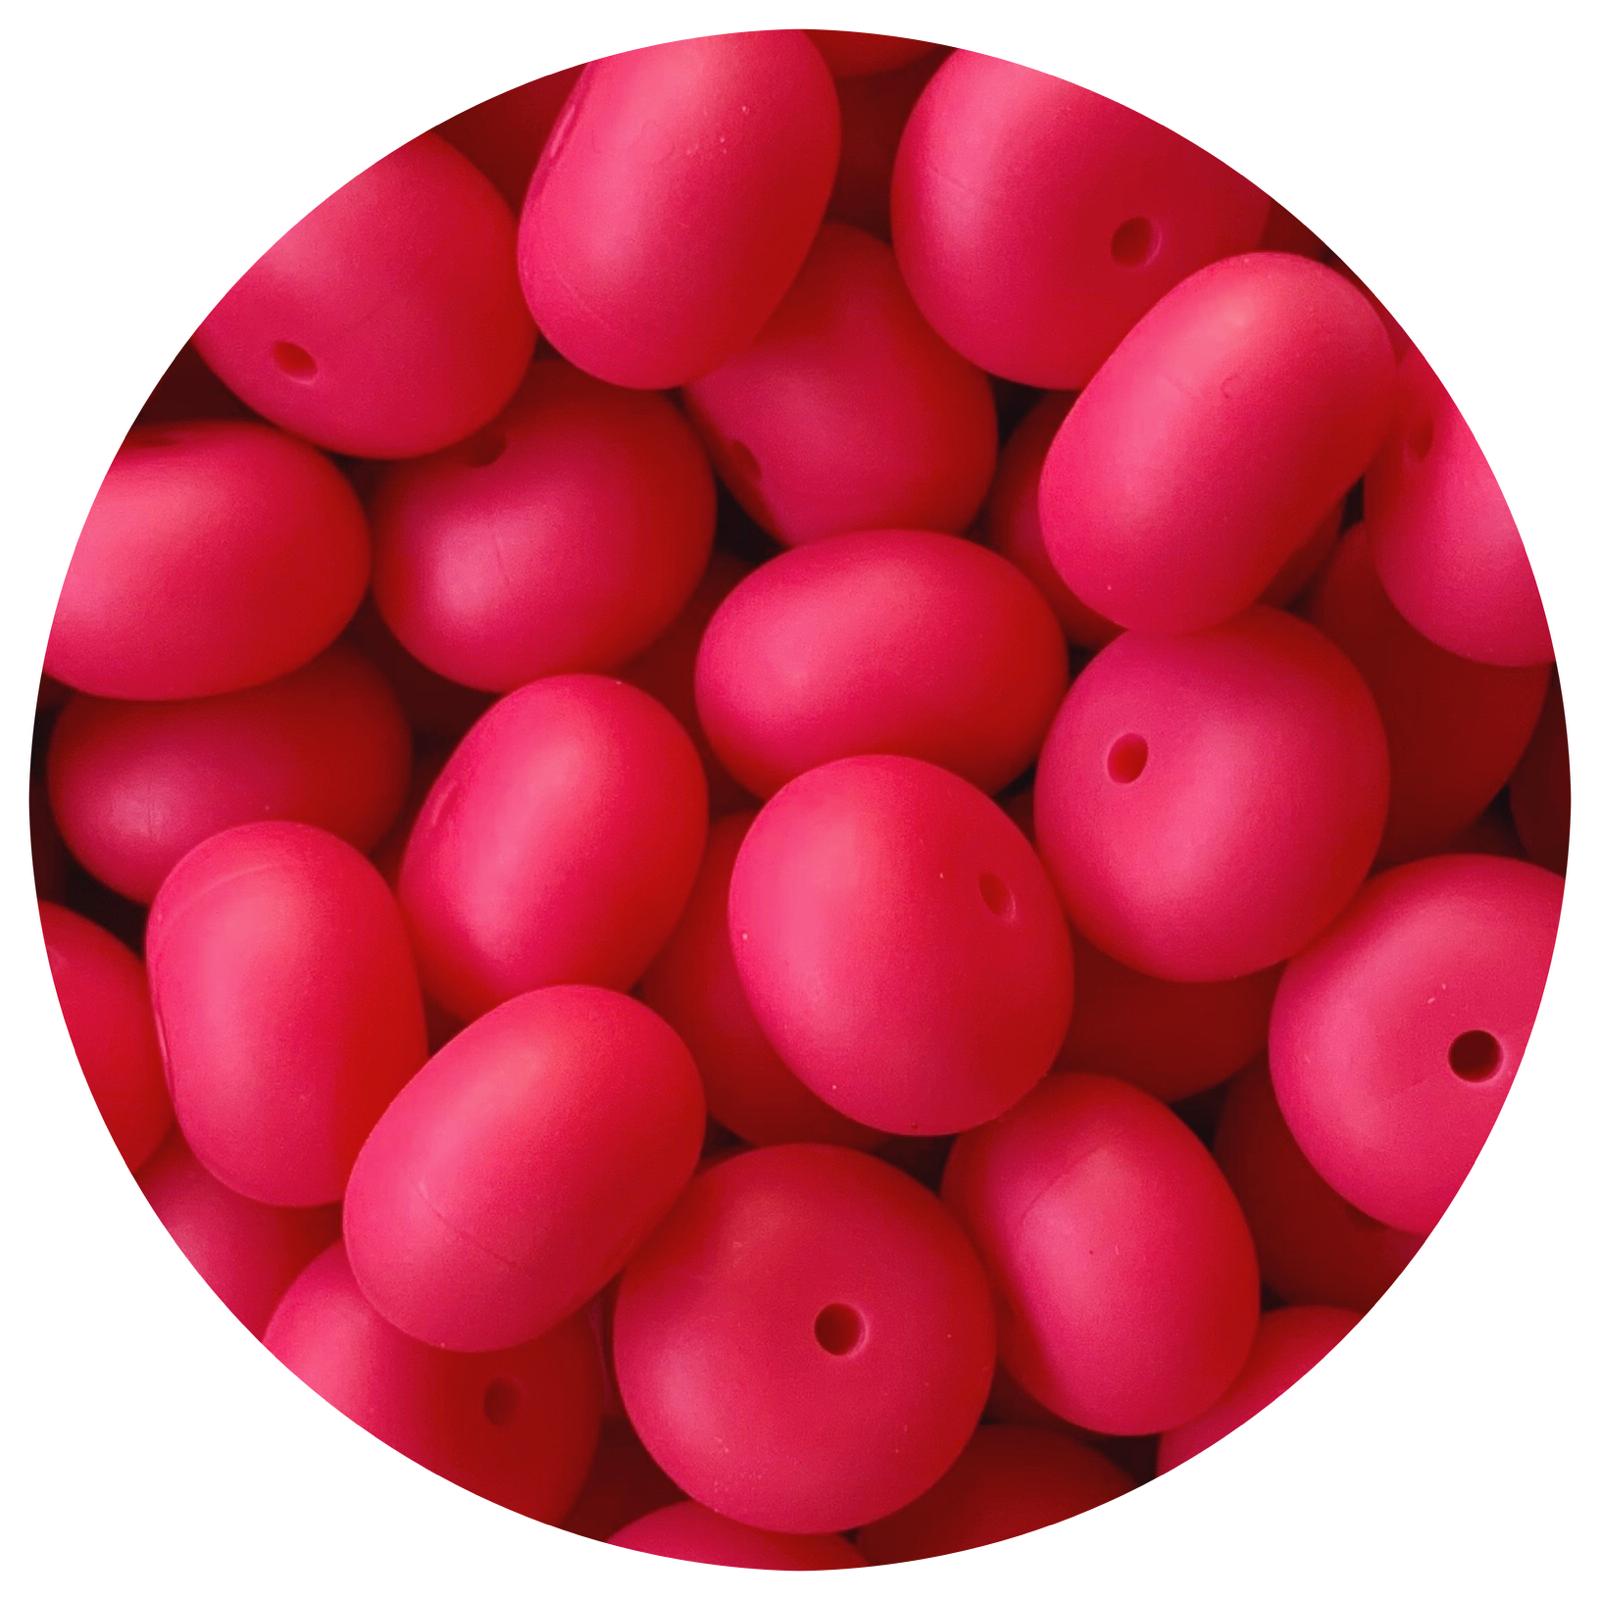 Raspberry - 22mm Abacus Silicone Beads - 5 Beads